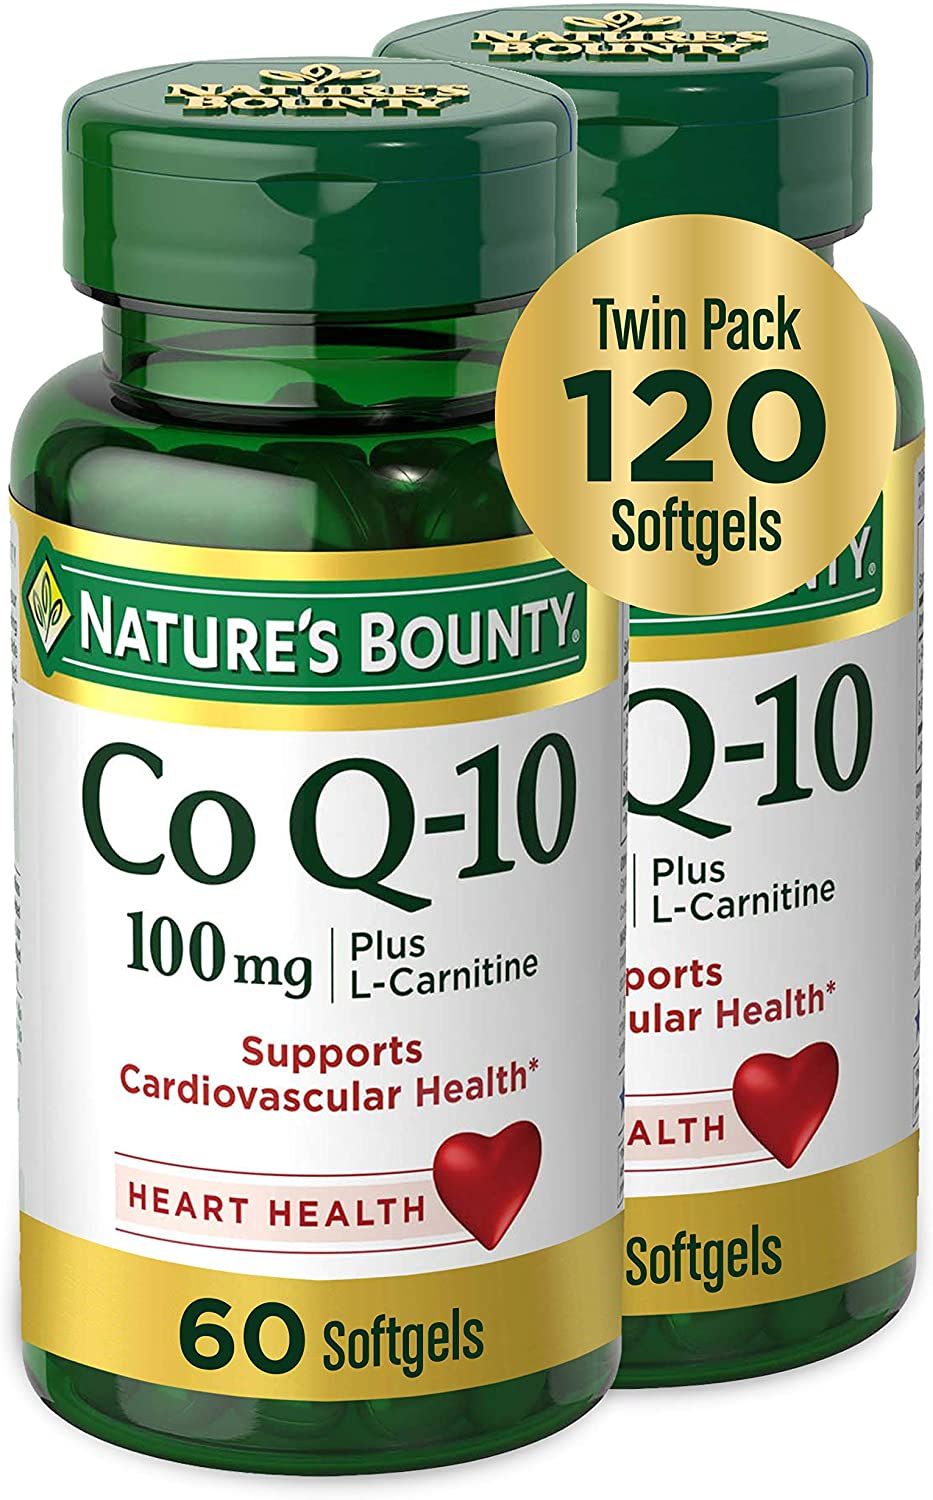 Nature's Bounty Co Q-10 100 mg Twin Pack Softgels, 60 ct - Pack of 2